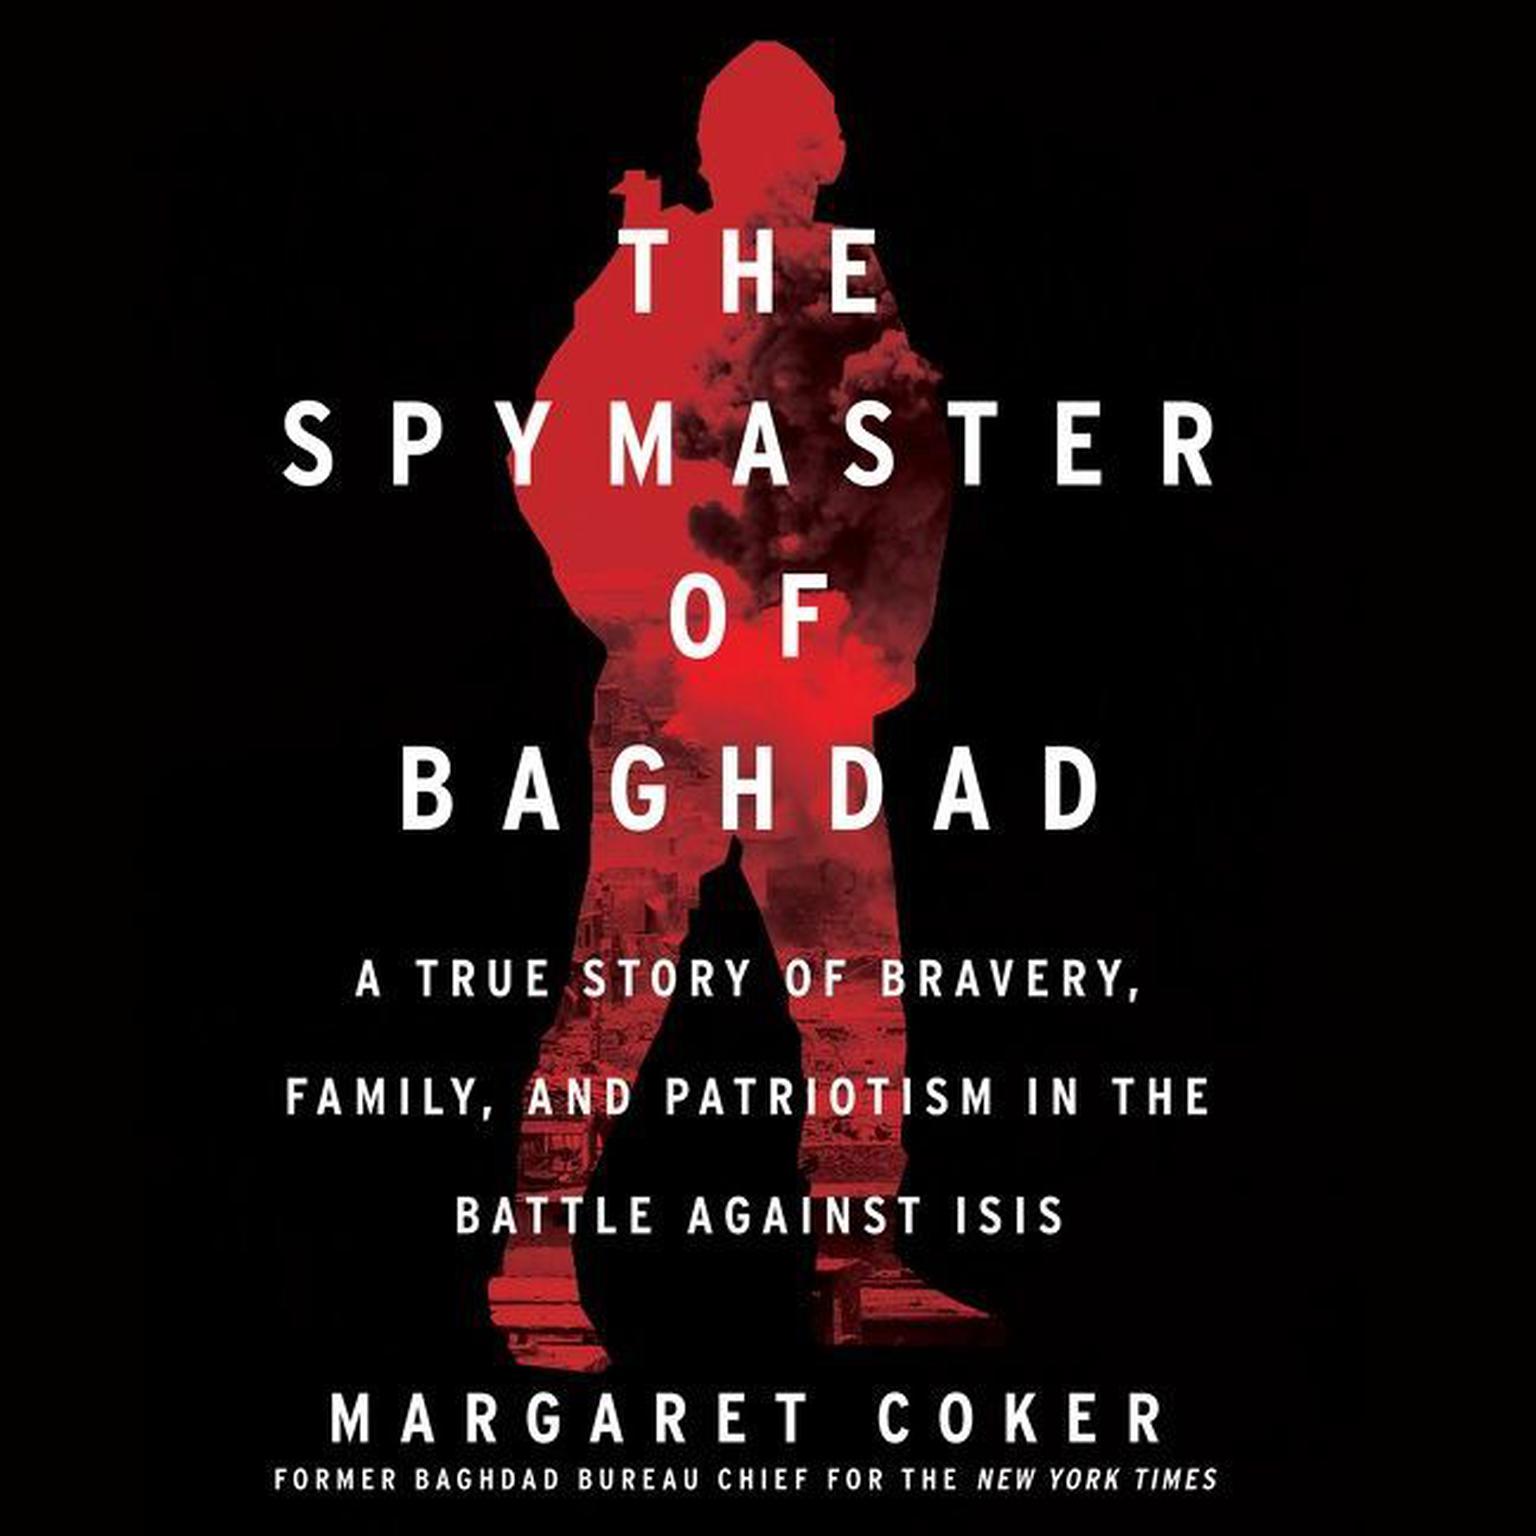 The Spymaster of Baghdad: A True Story of Bravery, Family, and Patriotism in the Battle Against ISIS Audiobook, by Margaret Coker